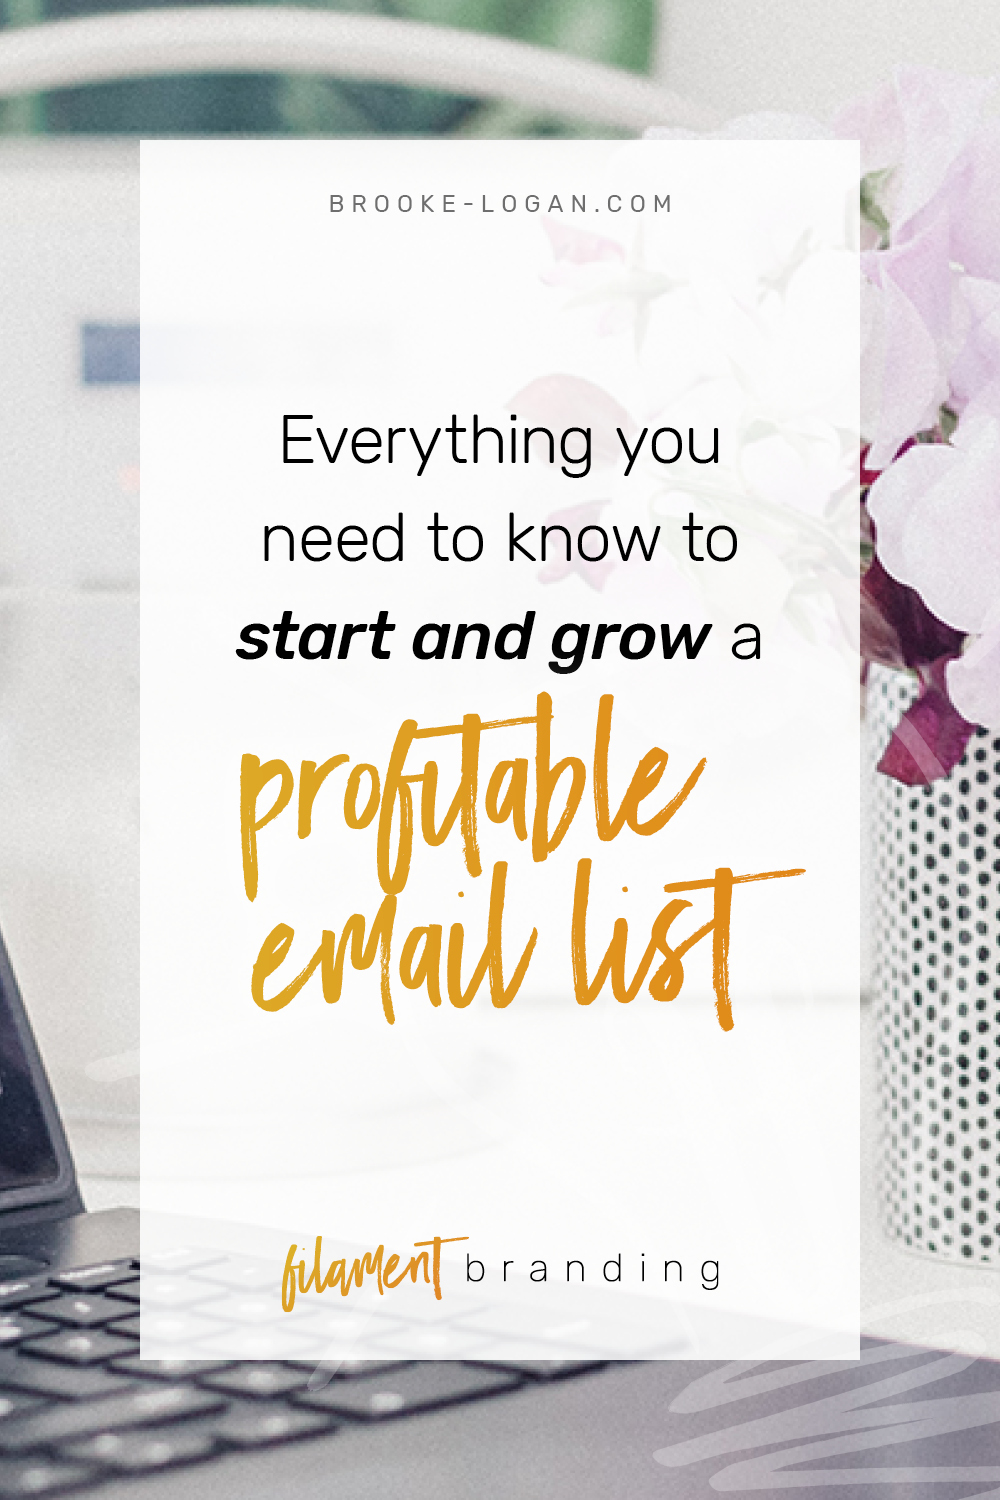 Ep 18: Everything you need to know to start and grow a profitable email list